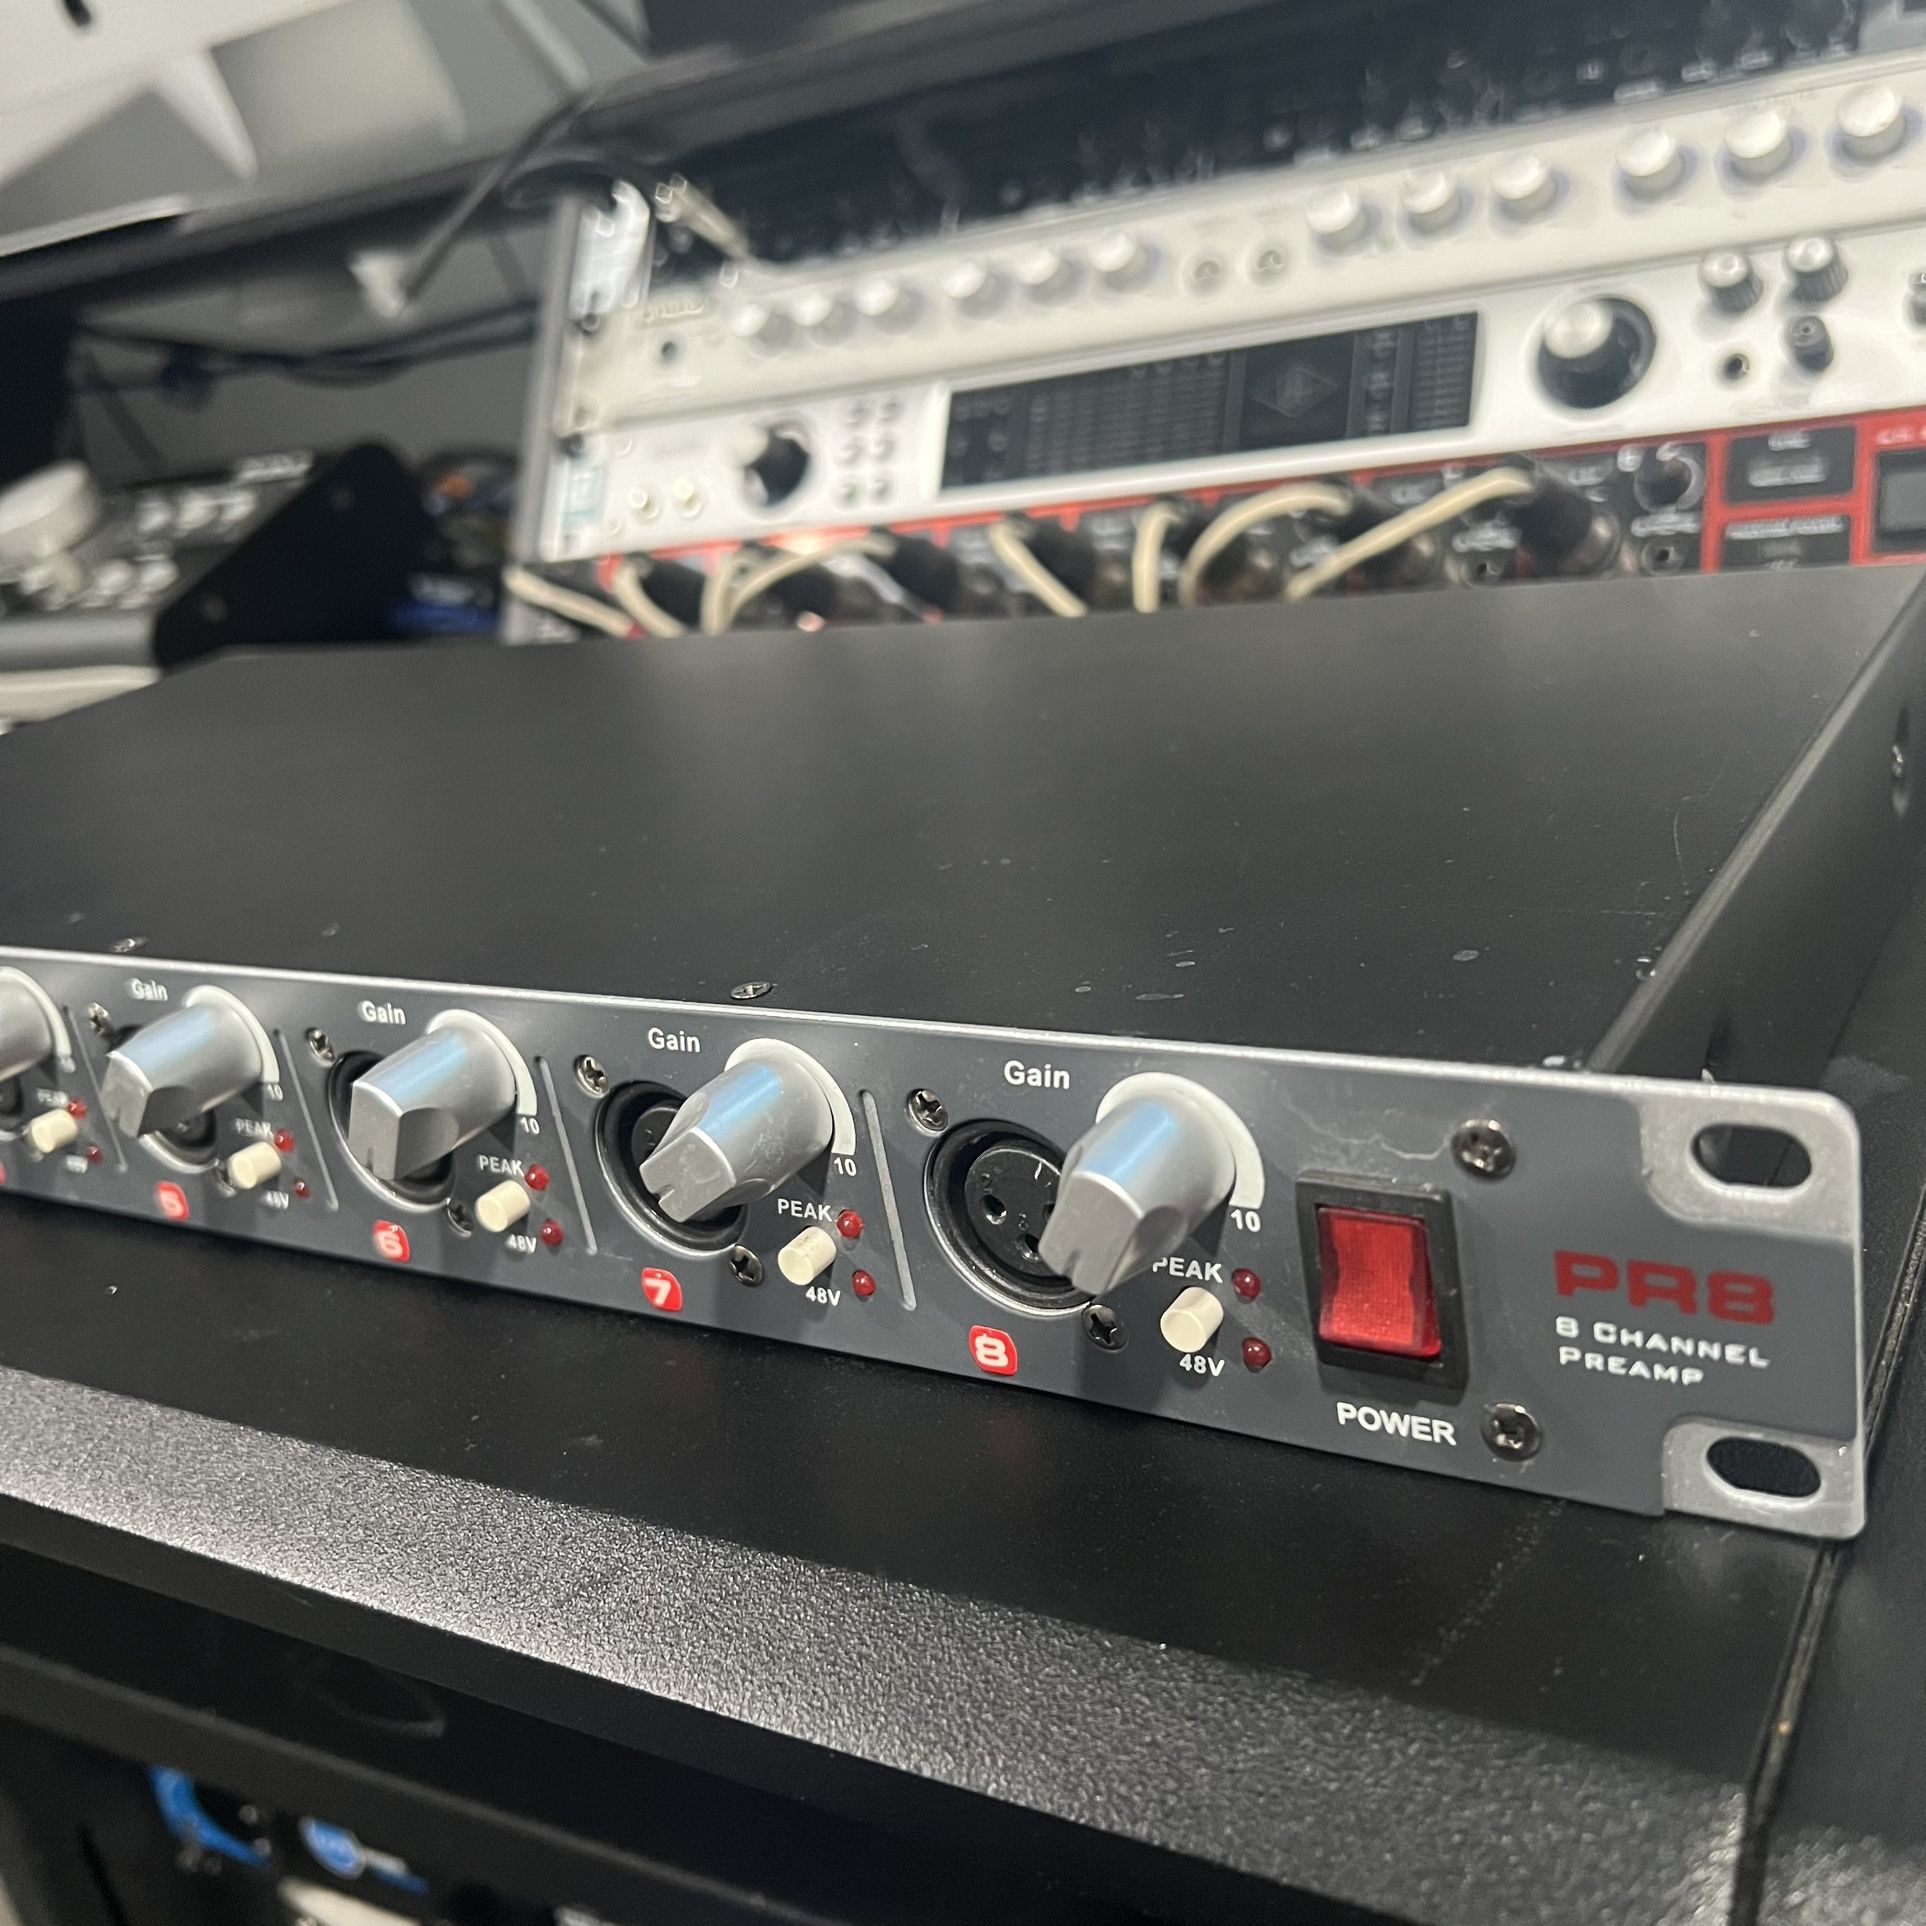 8 channel Preamp